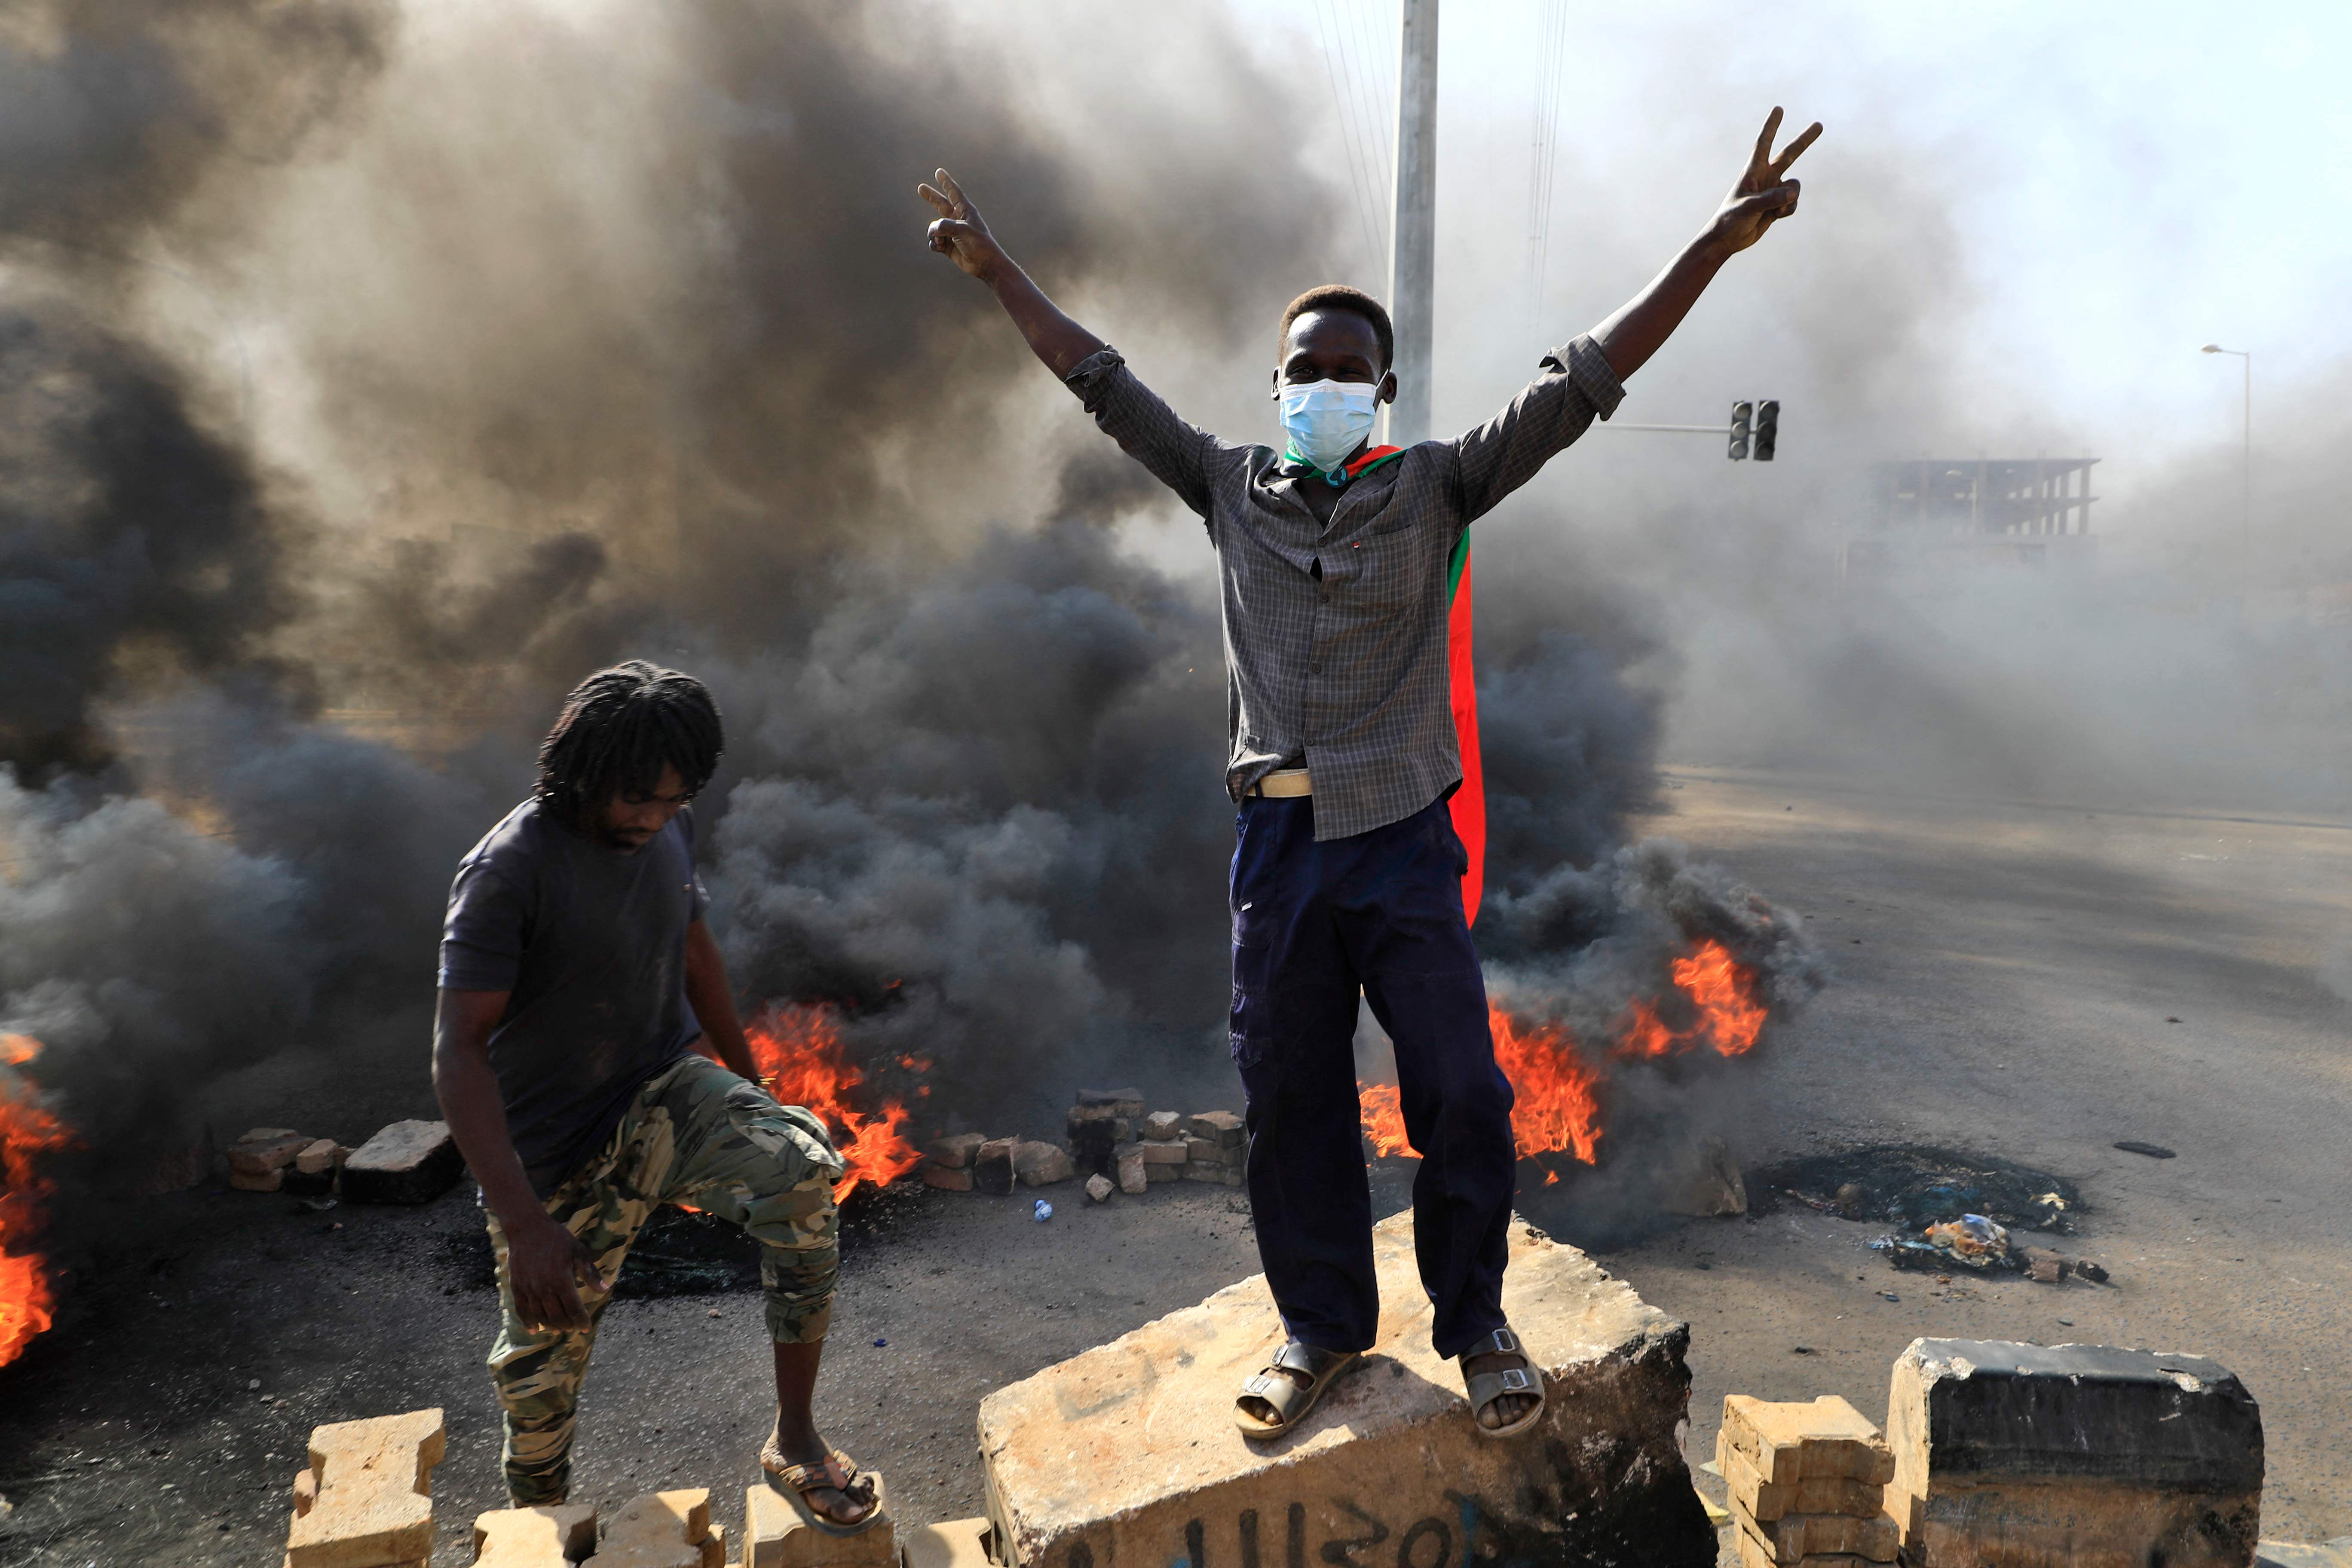 <p>Protesters burn tyres to block a road in the capital Khartoum on Monday, denouncing overnight detentions by the army of members of Sudan’s government </p>